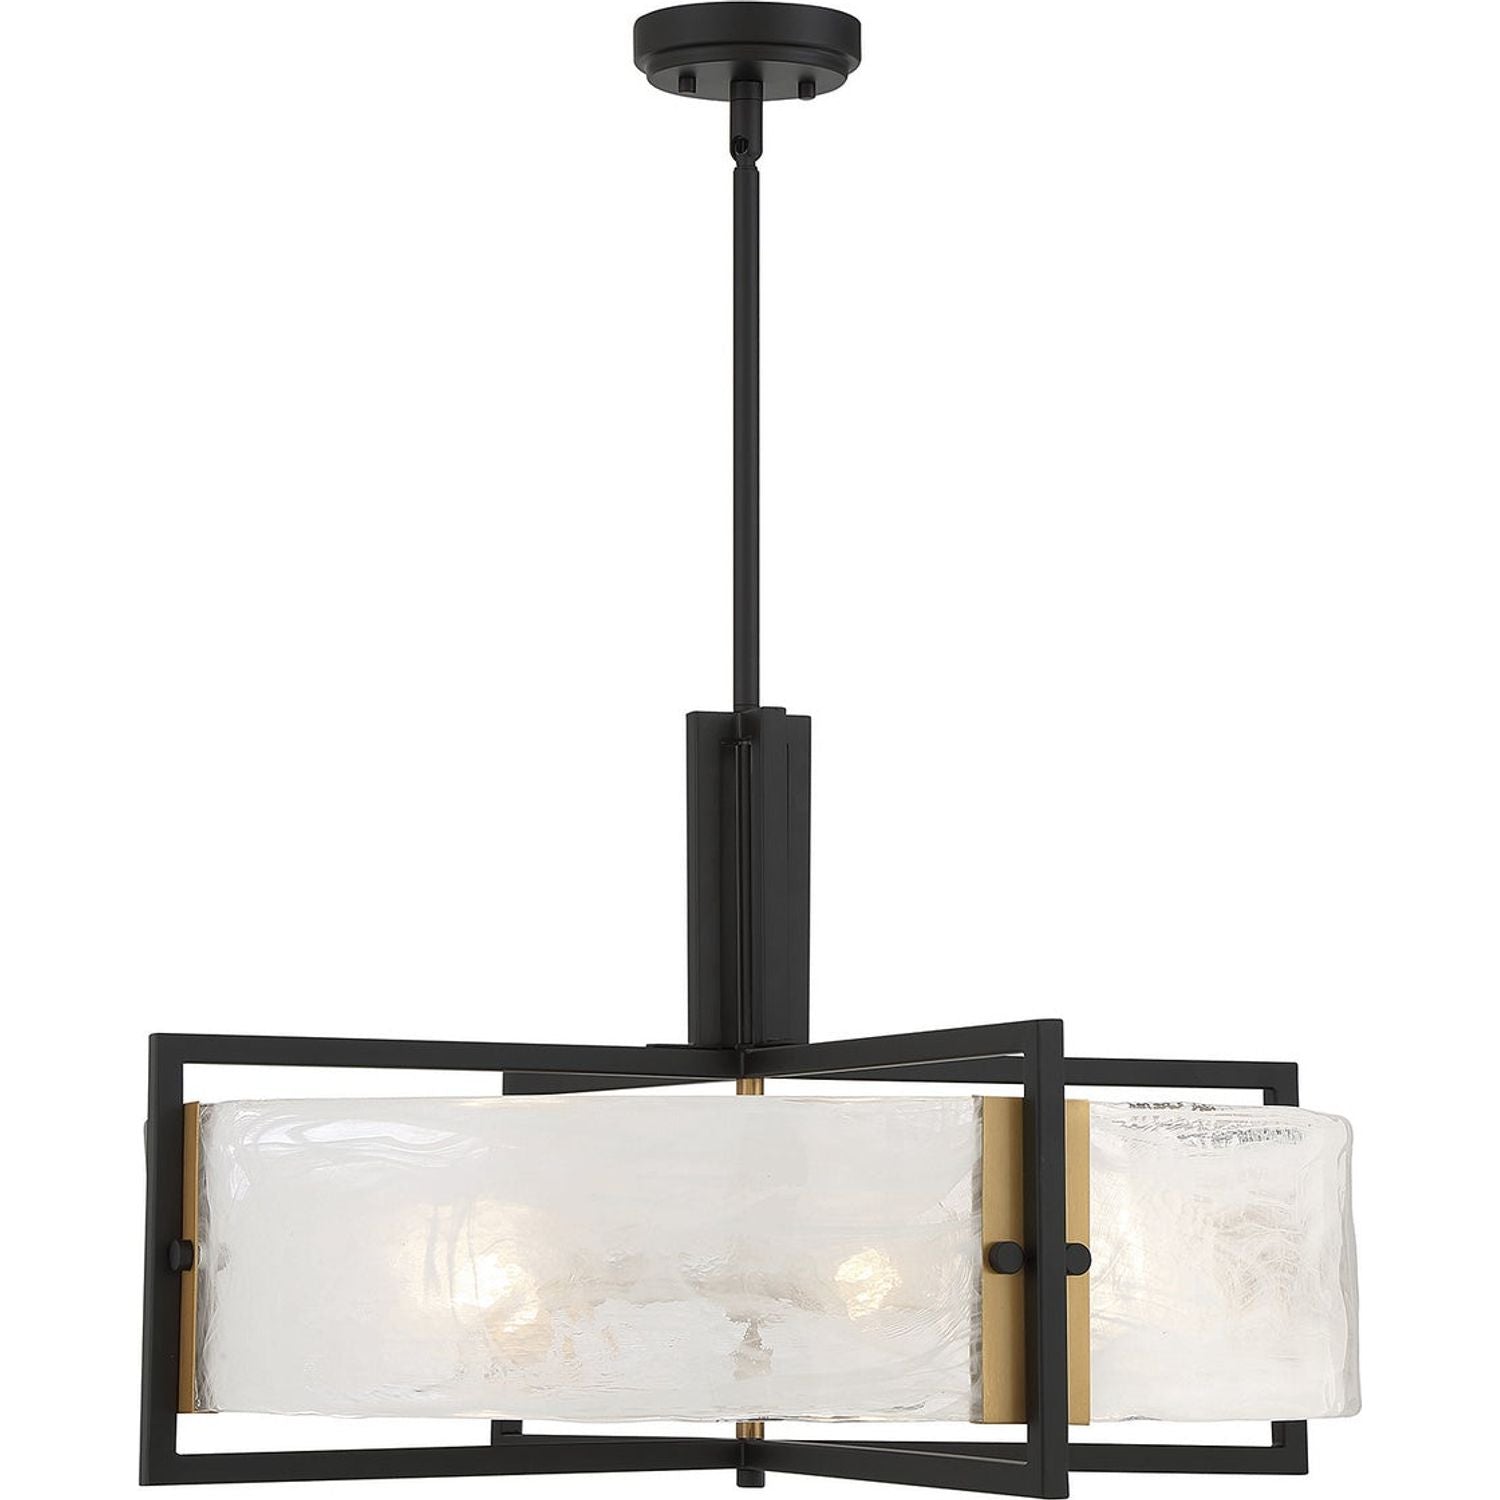 Savoy House - 7-1696-5-143 - Five Light Pendant - Hayward - Matte Black with Warm Brass Accents